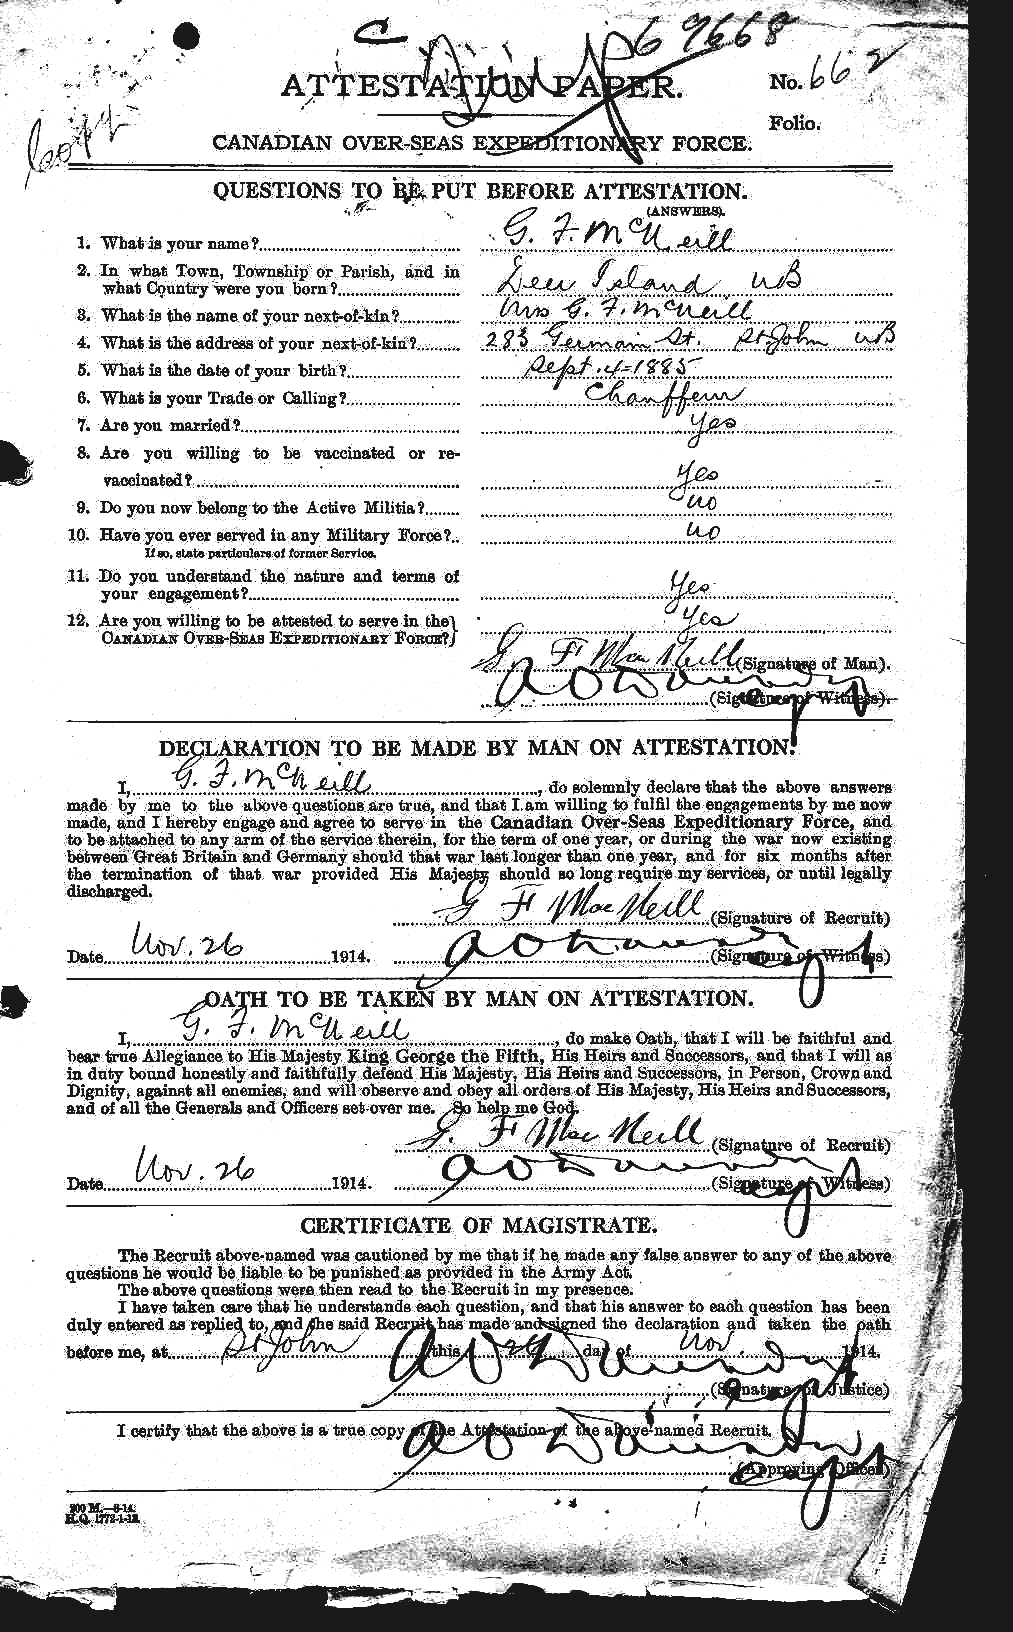 Personnel Records of the First World War - CEF 538916a